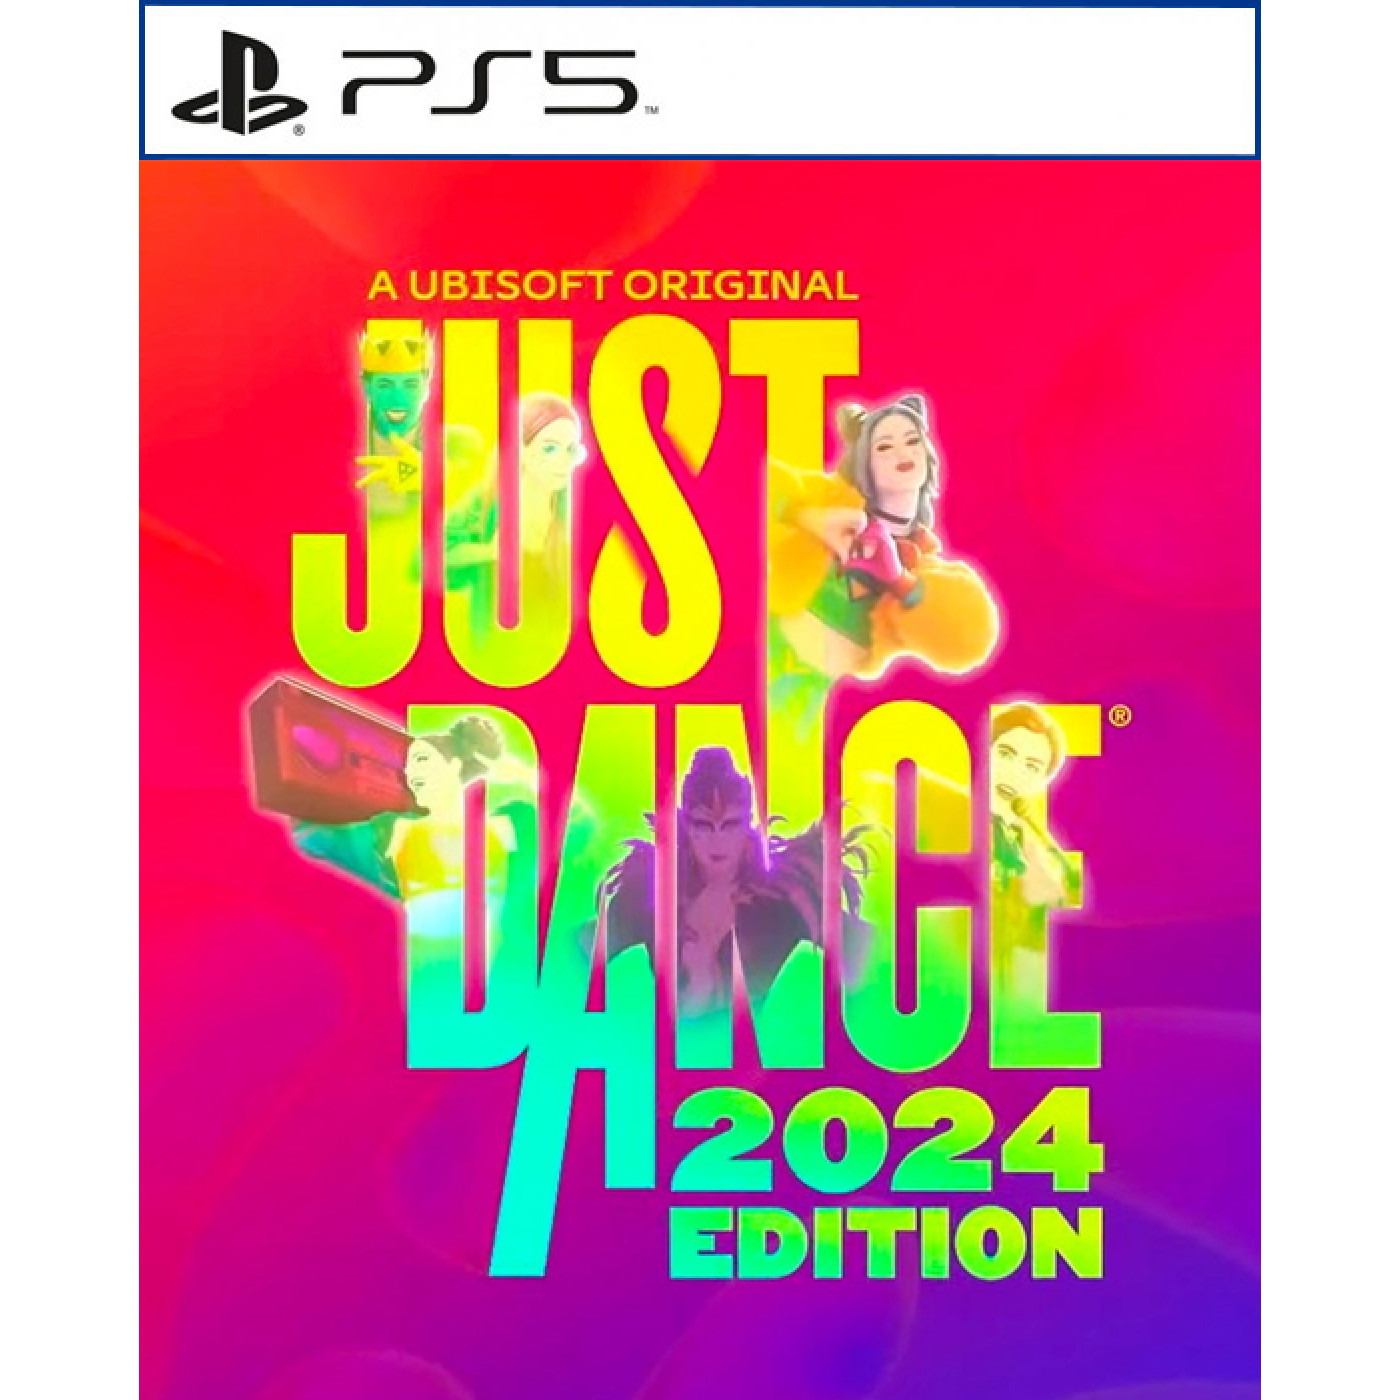 Just Dance 2024 Edition Game Ps5 Giá Rẻ Tại Halo Shop 8840